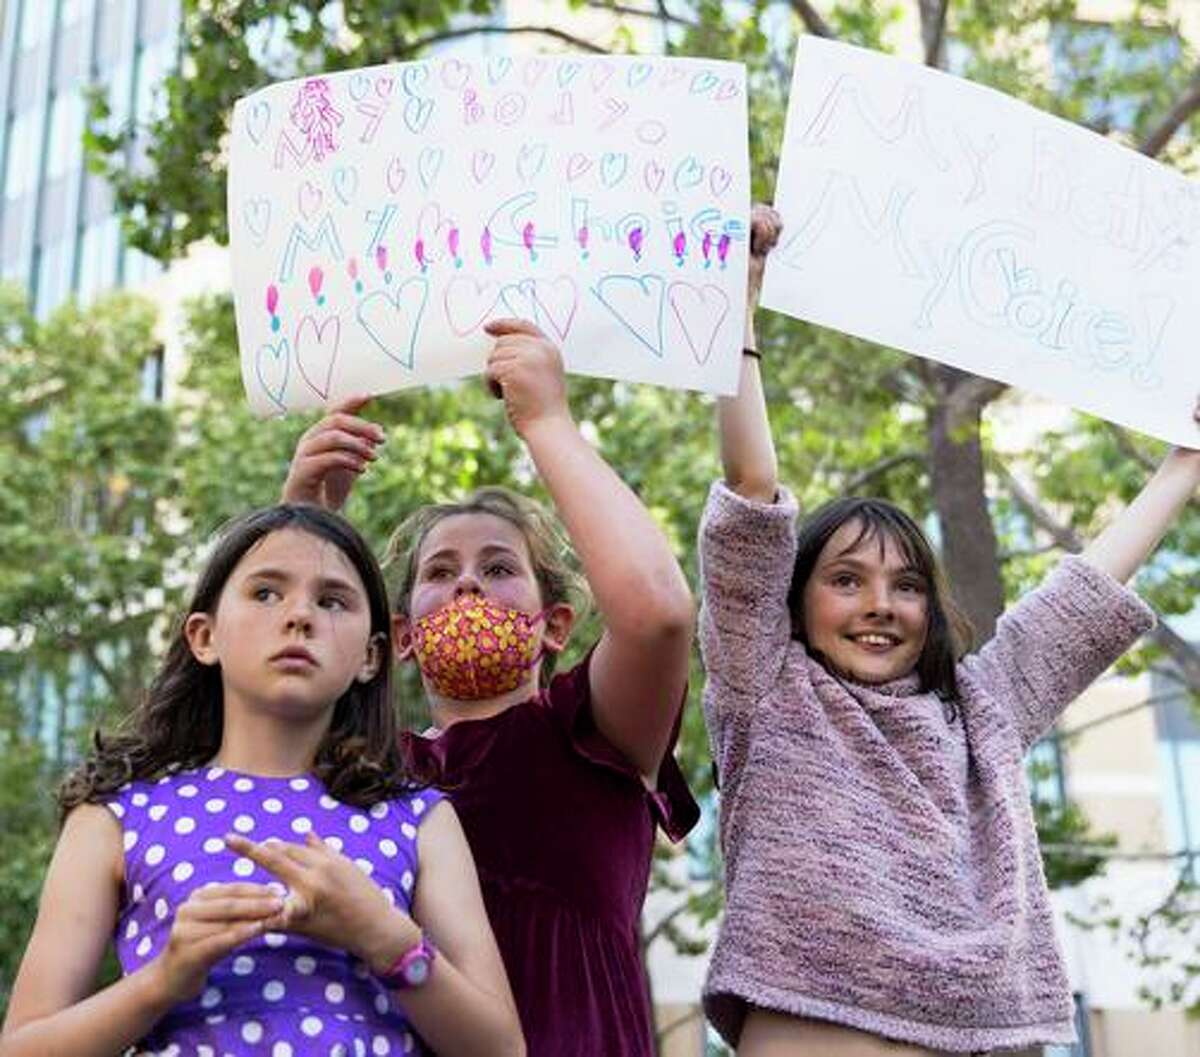 Imogen McRae, 8 (left), Aviva Shapiro, 9, and Saskia McRae, 10, protest at the Dellums Federal Building in Oakland in May.